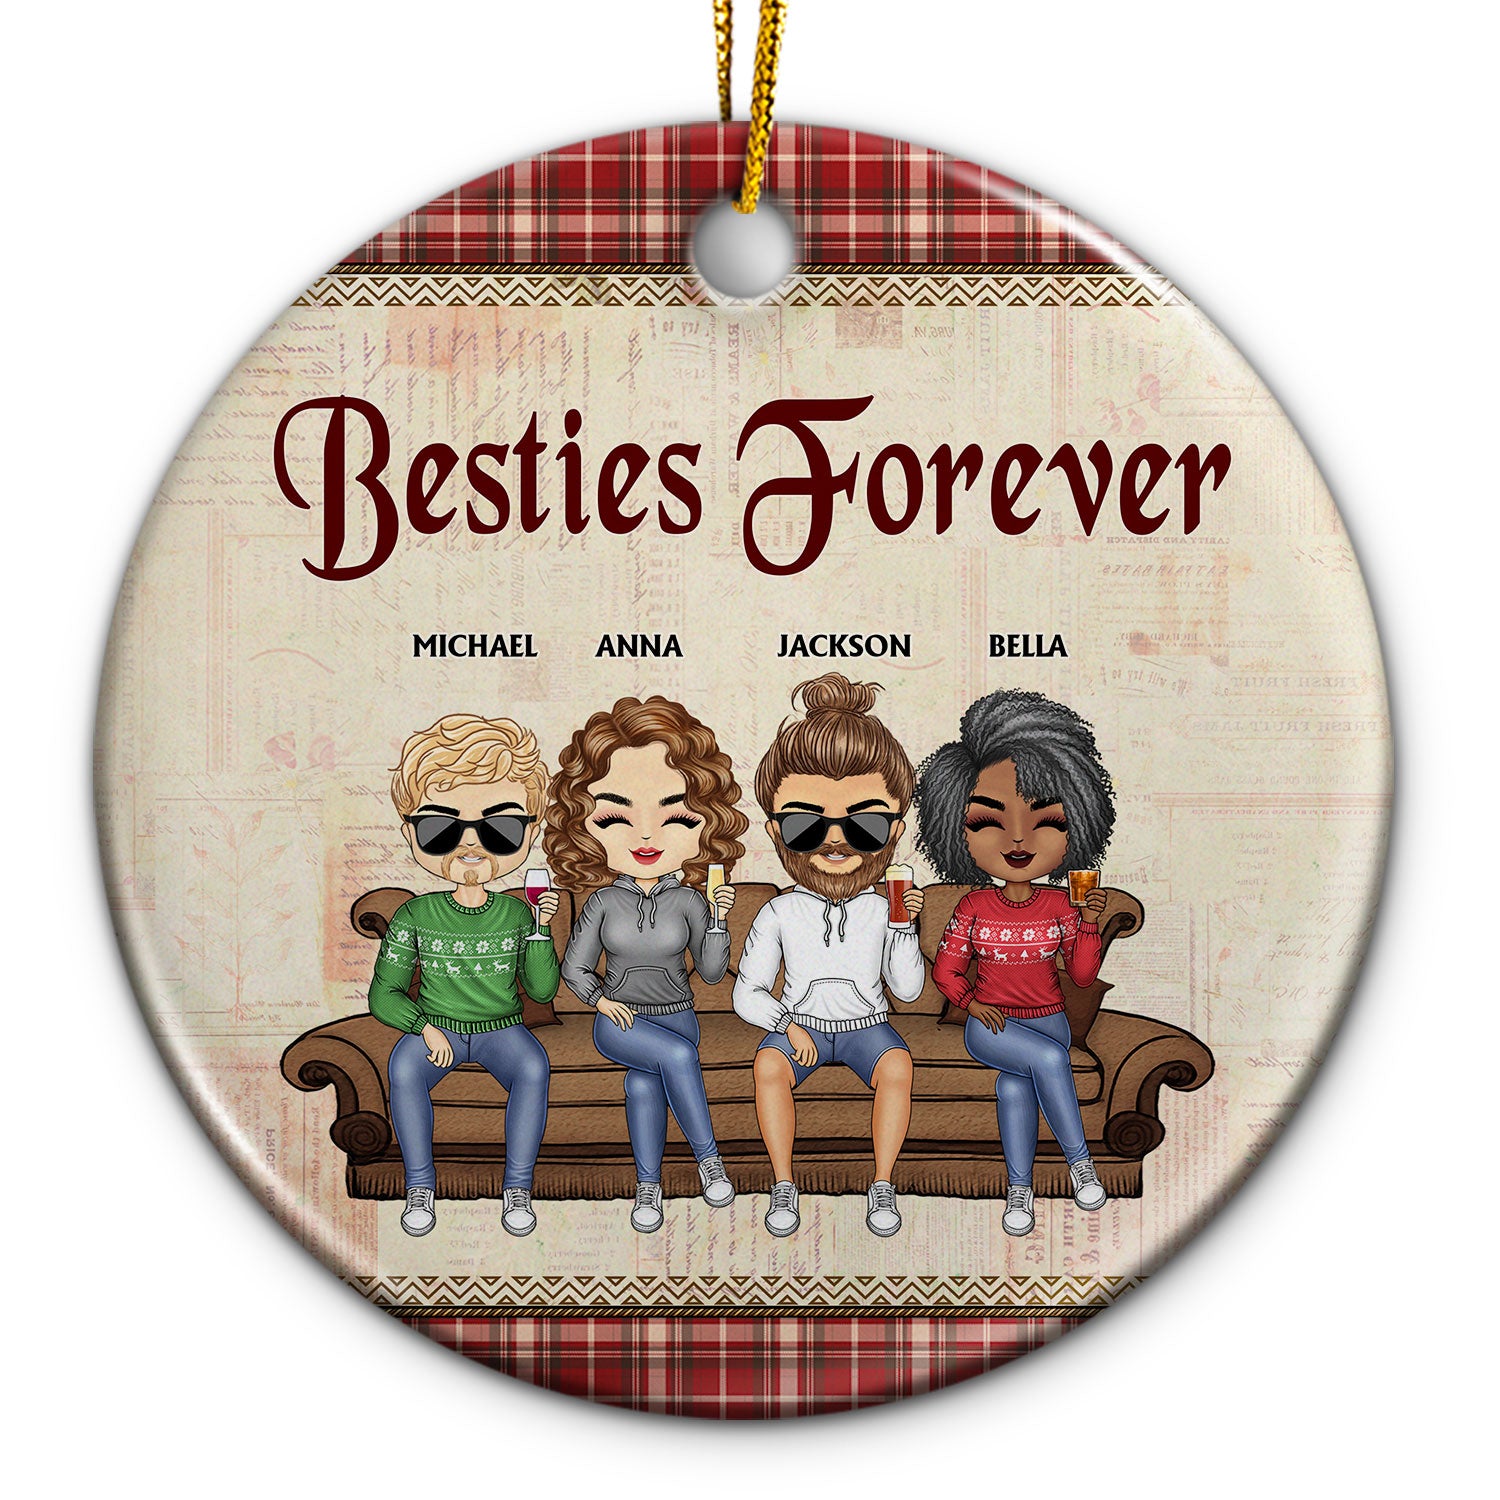 Besties Forever Sisters Brothers Siblings Family - Christmas Gift - Personalized Custom Circle Ceramic Ornament